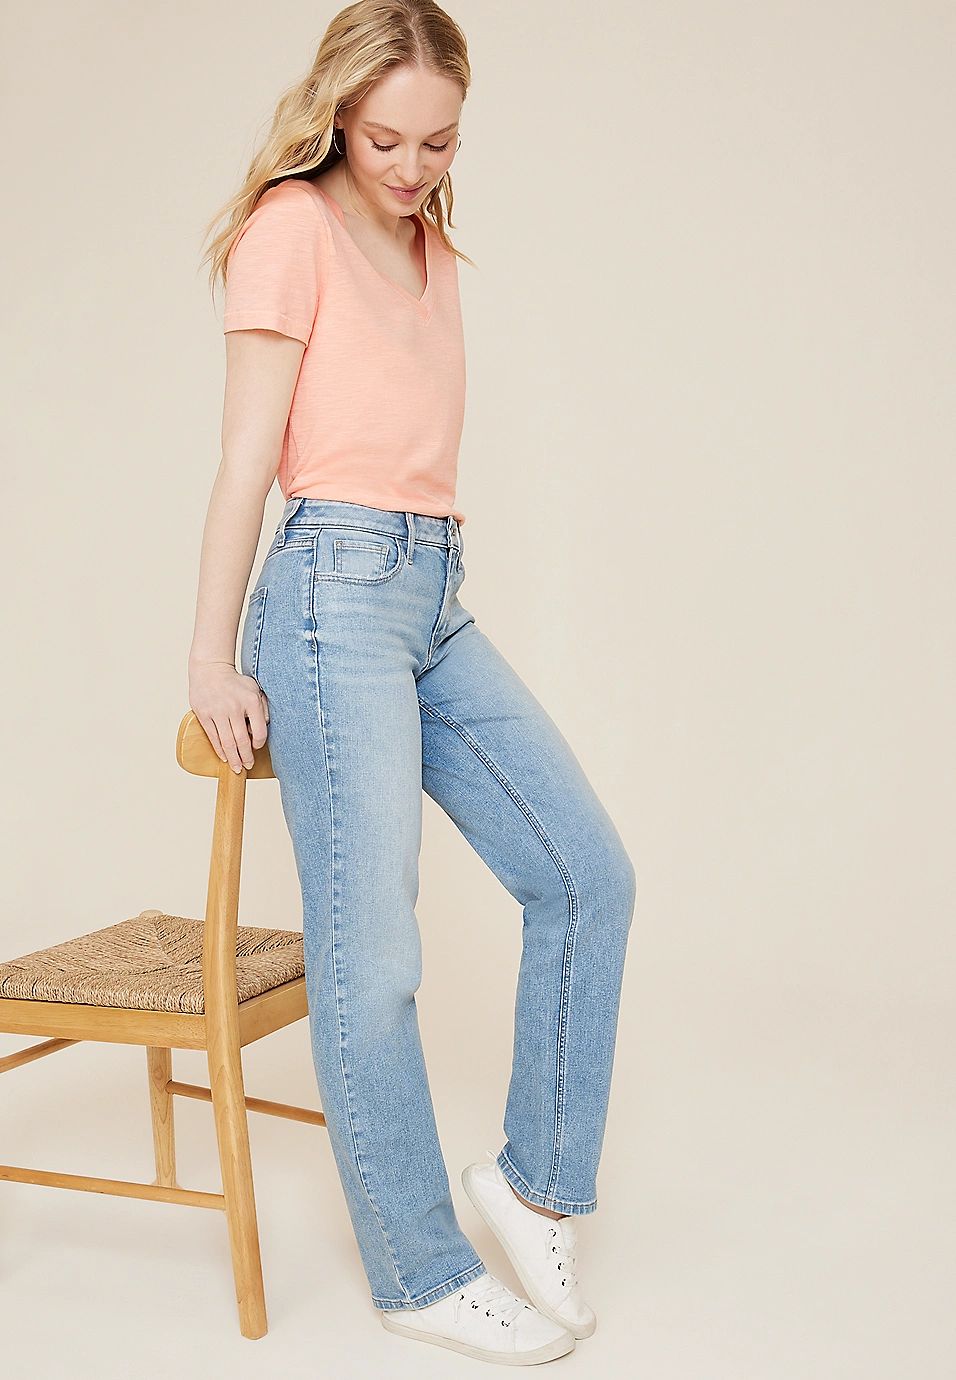 m jeans by maurices™ 90s Light High Rise Straight Jean | Maurices